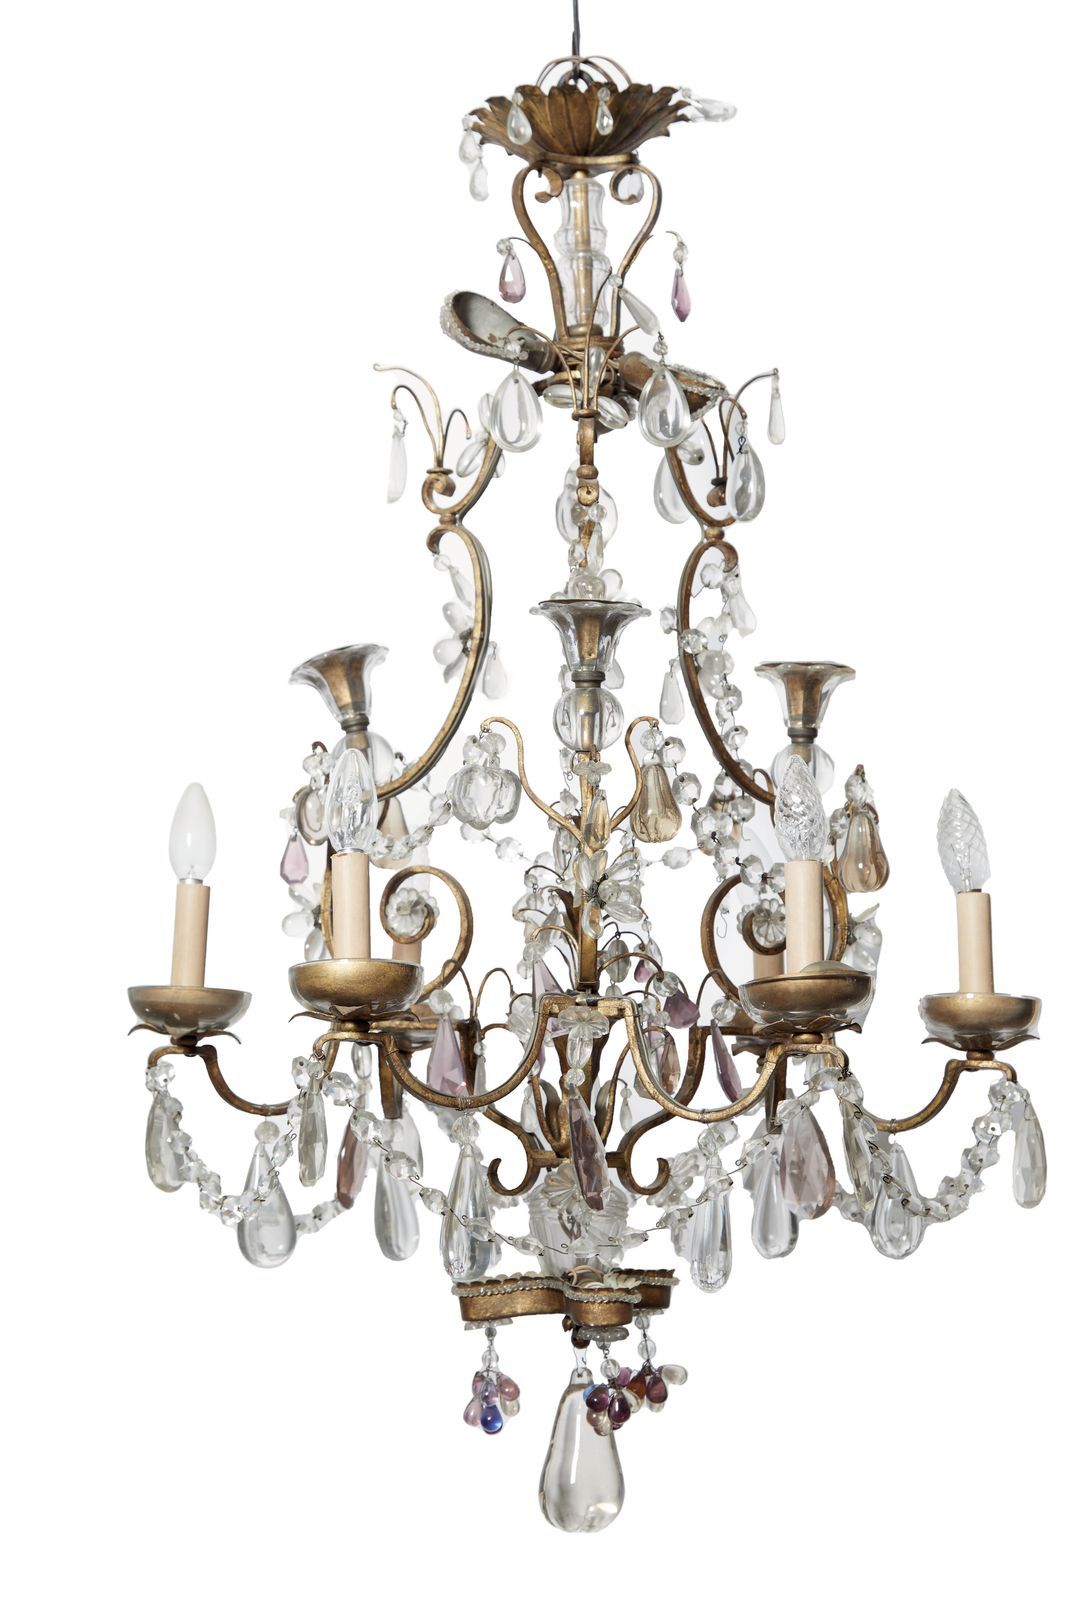 Null 279 In the taste of Bagues

Cage chandelier with 9 arms of light, with gild&hellip;